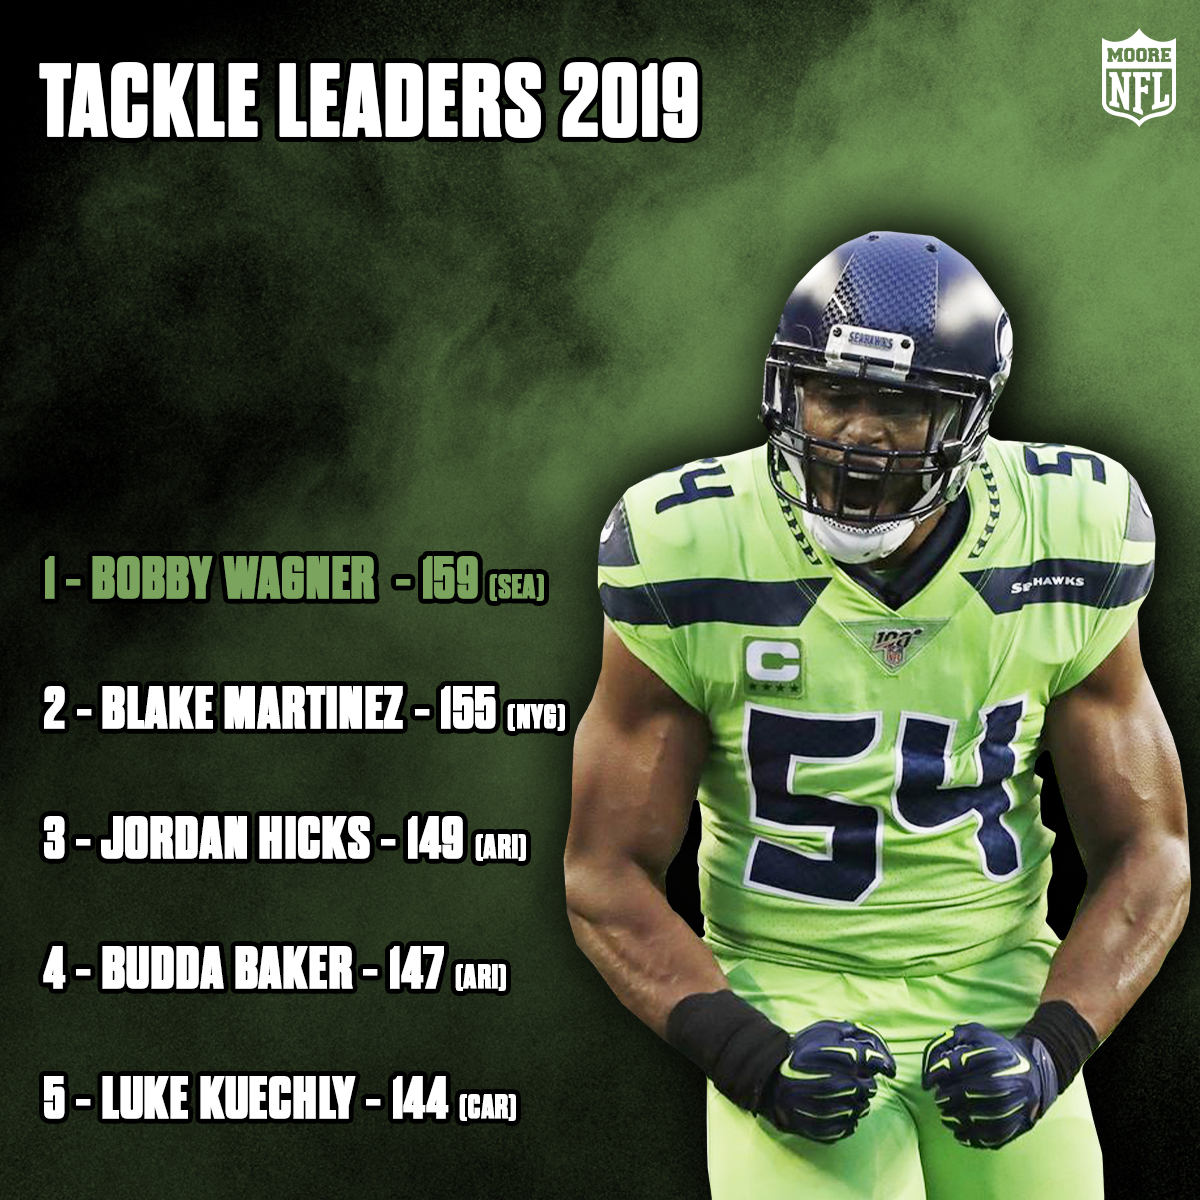 A solid year leading the league in tackles for Wagner, can he do it again in 2020? 💪

#nfl #nfldraft #nflnews #nflupdates #nfluk #nfldiscussion #nflfreeagency #nflhighlights #bobbywagner #seahawks #12s #seattle #seattleseahawks #Wagner